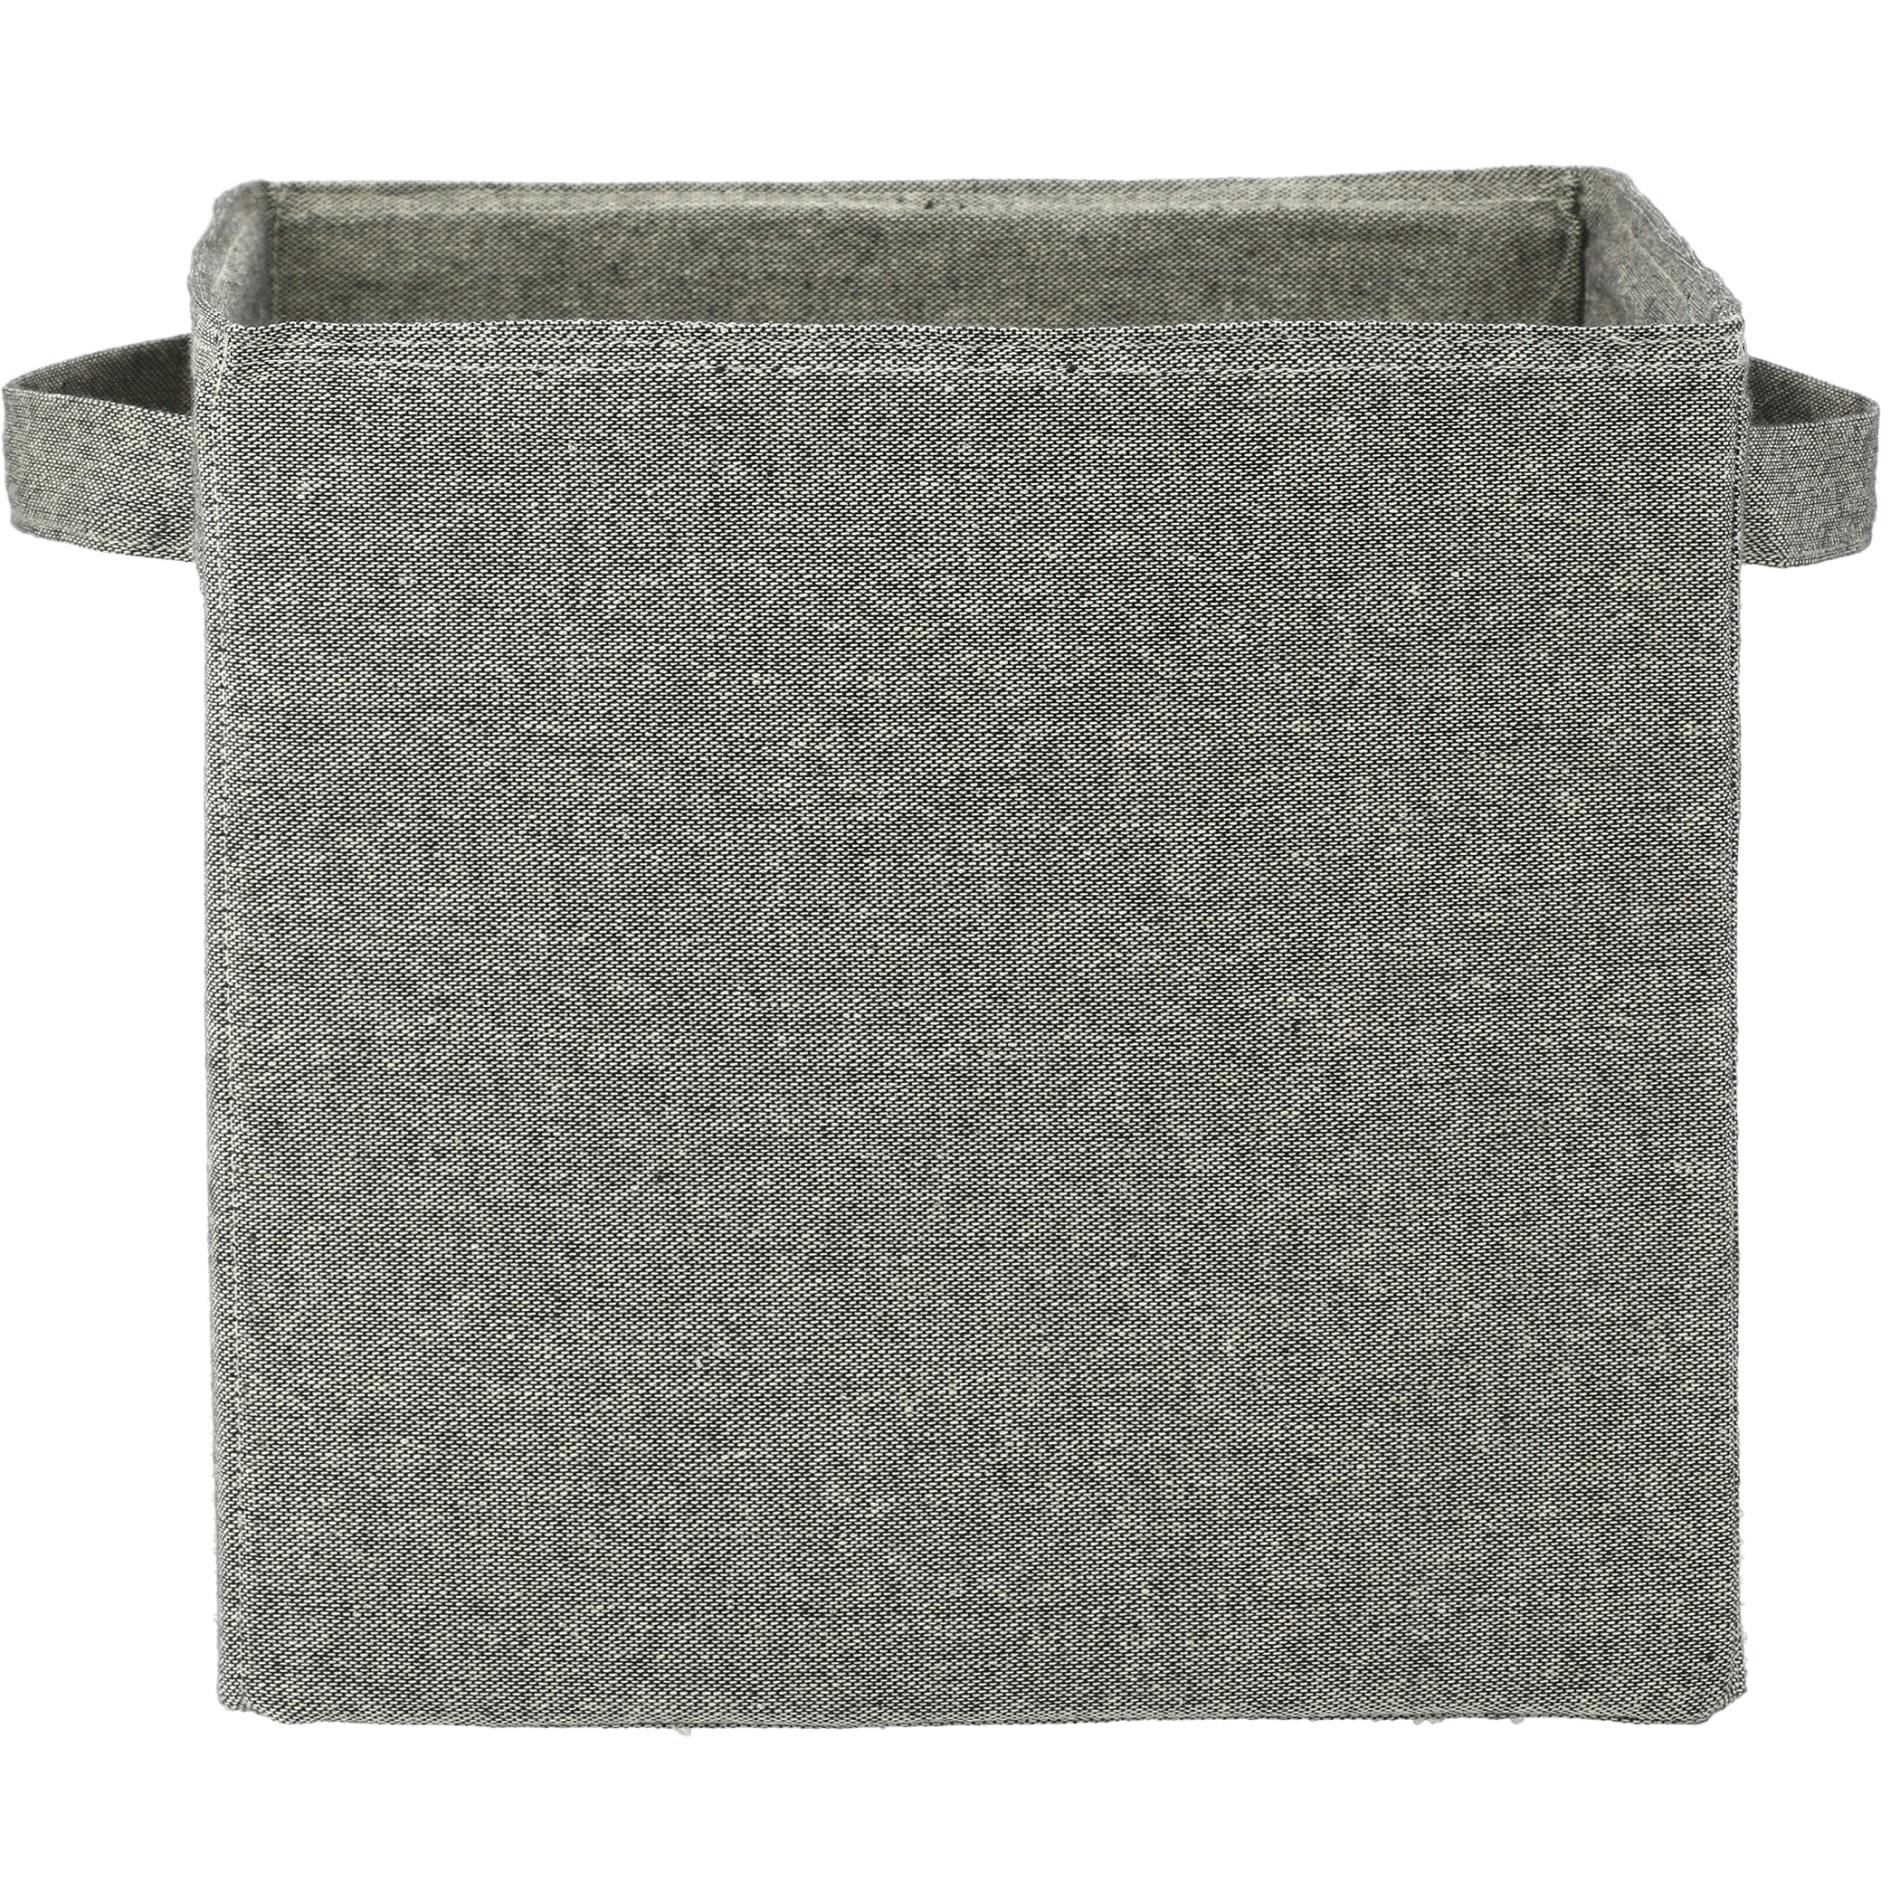 Recycled Cotton Storage Cube - additional Image 1